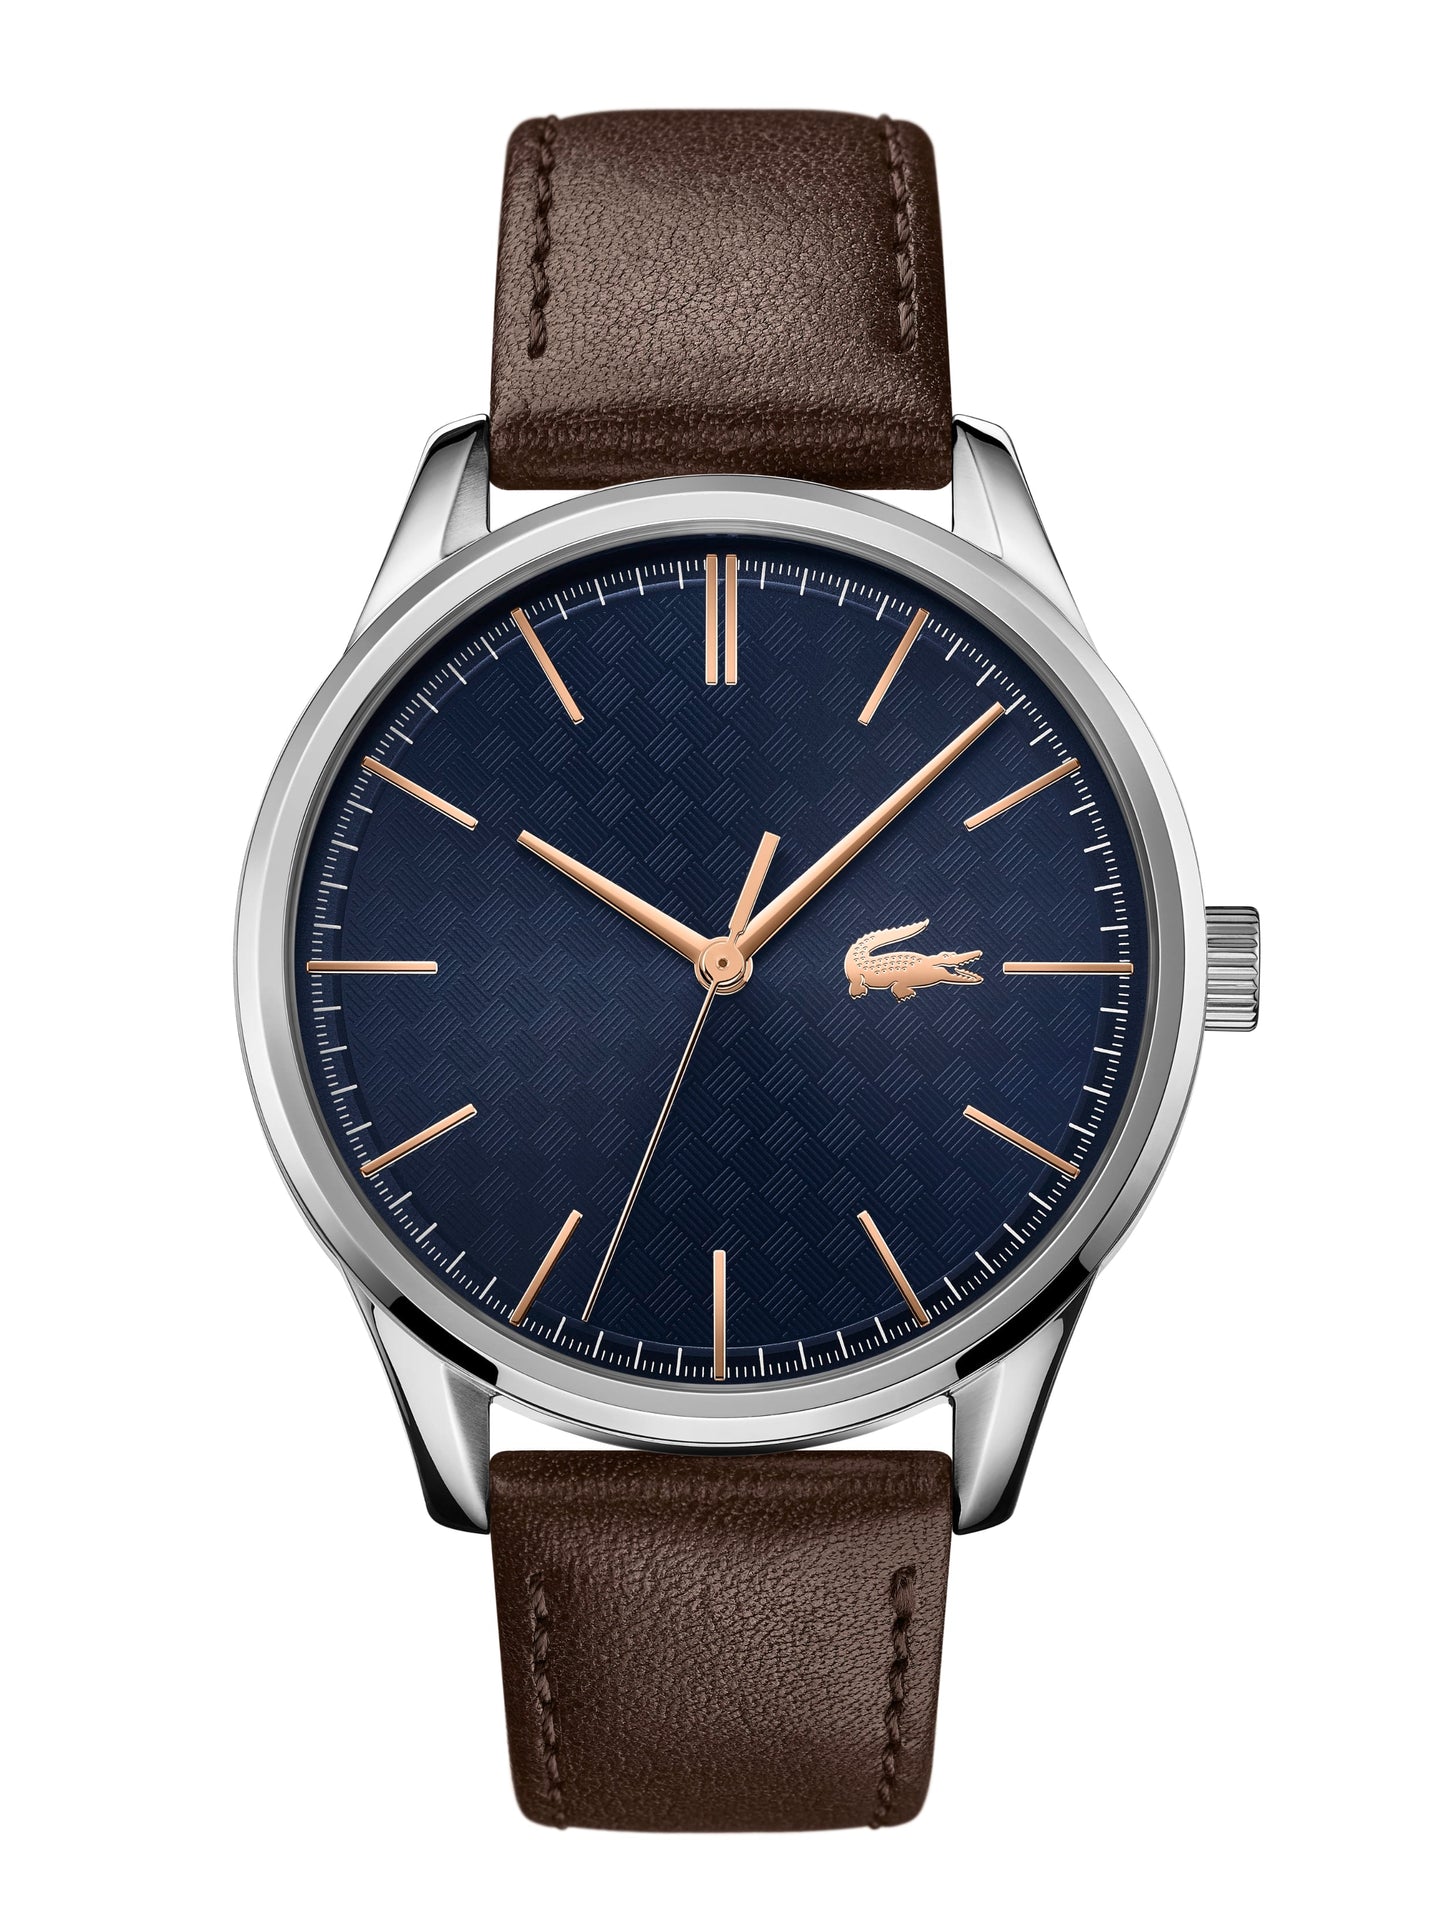 Lacoste Men's Vienna Blue - Brown Watch 2011046 with brown leather strap.